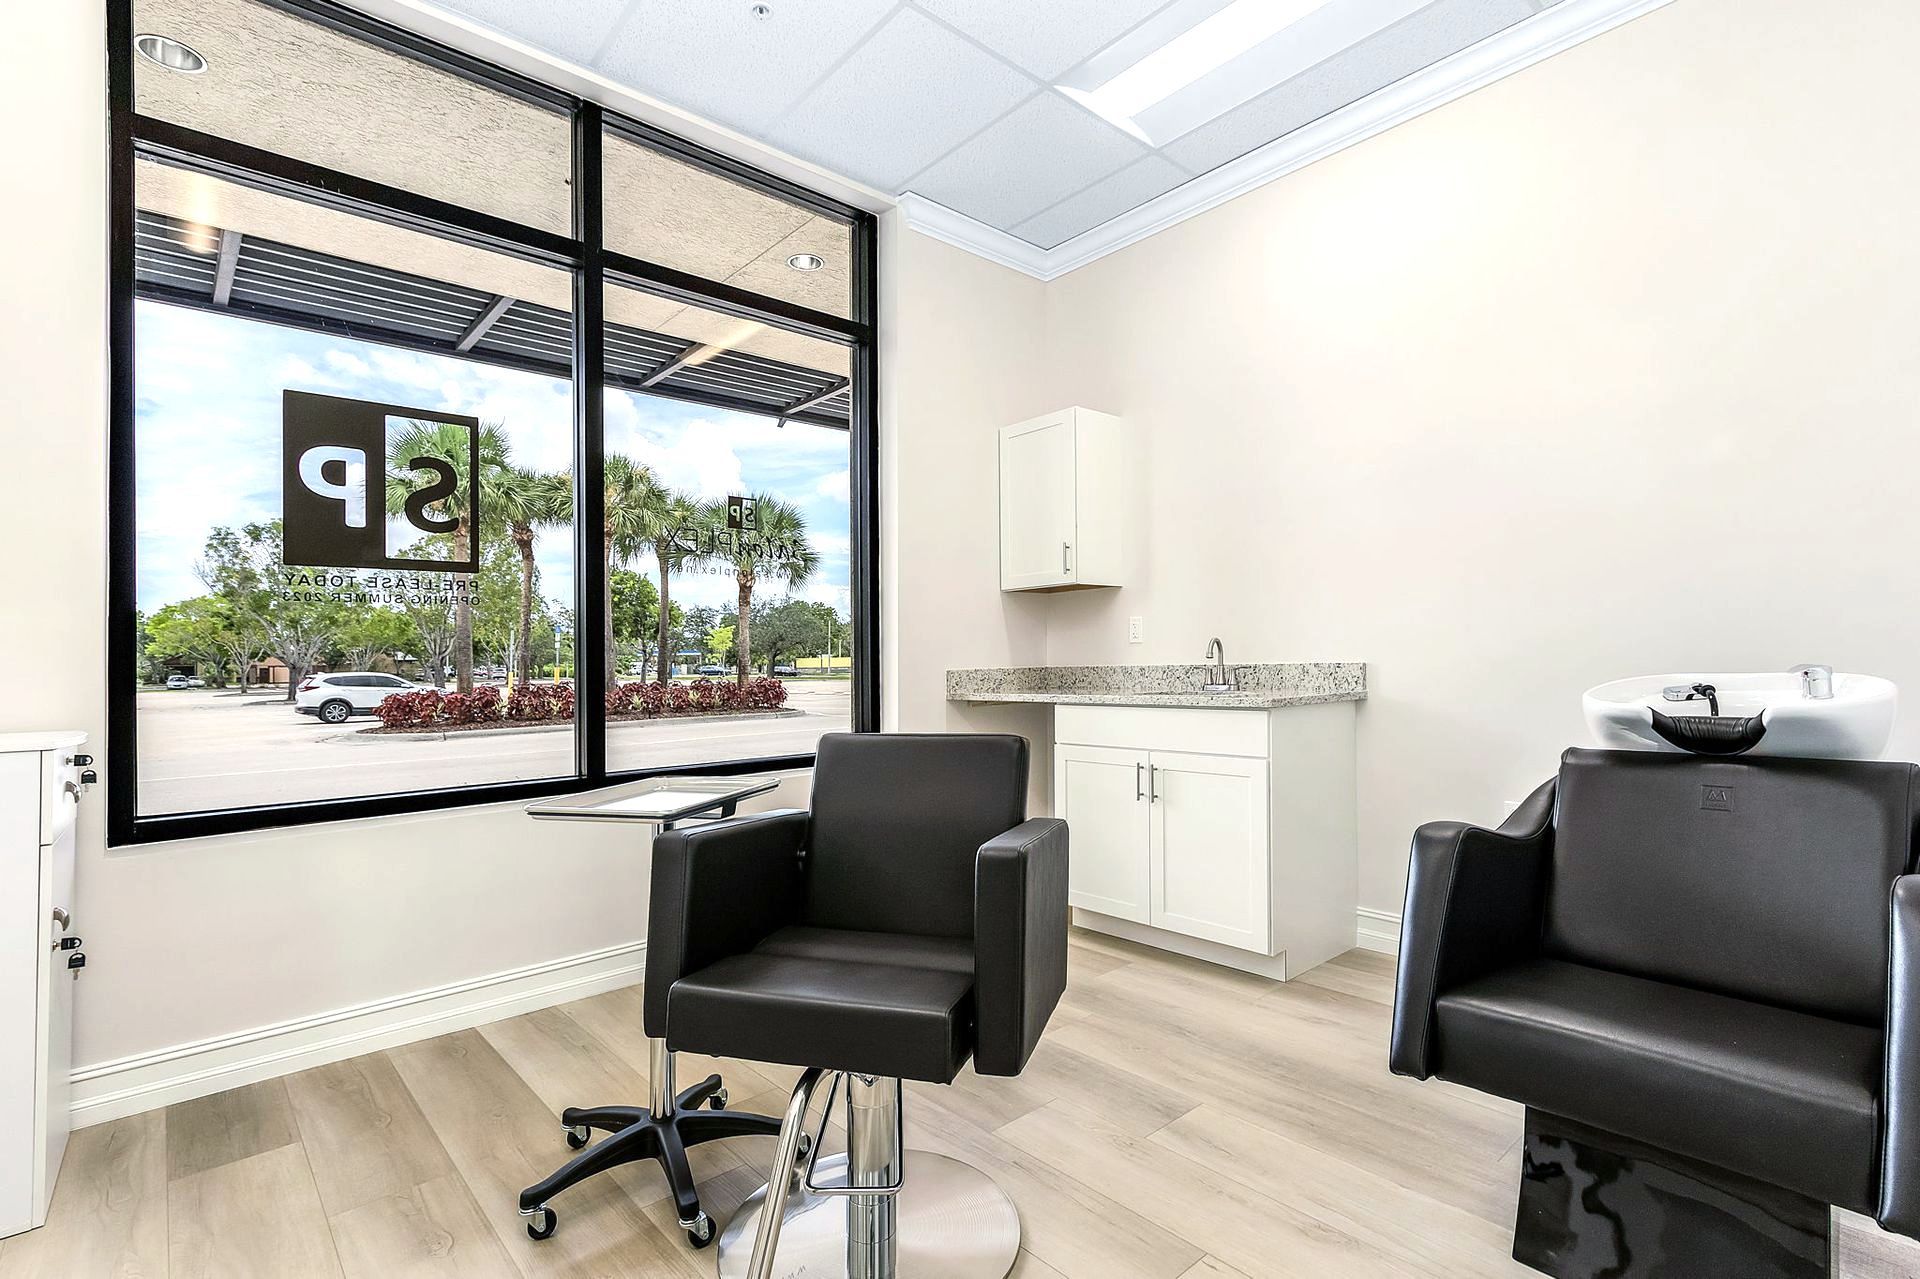 SalonPLEX Suites' Modern Equipment and Furnishings are provided to each member!